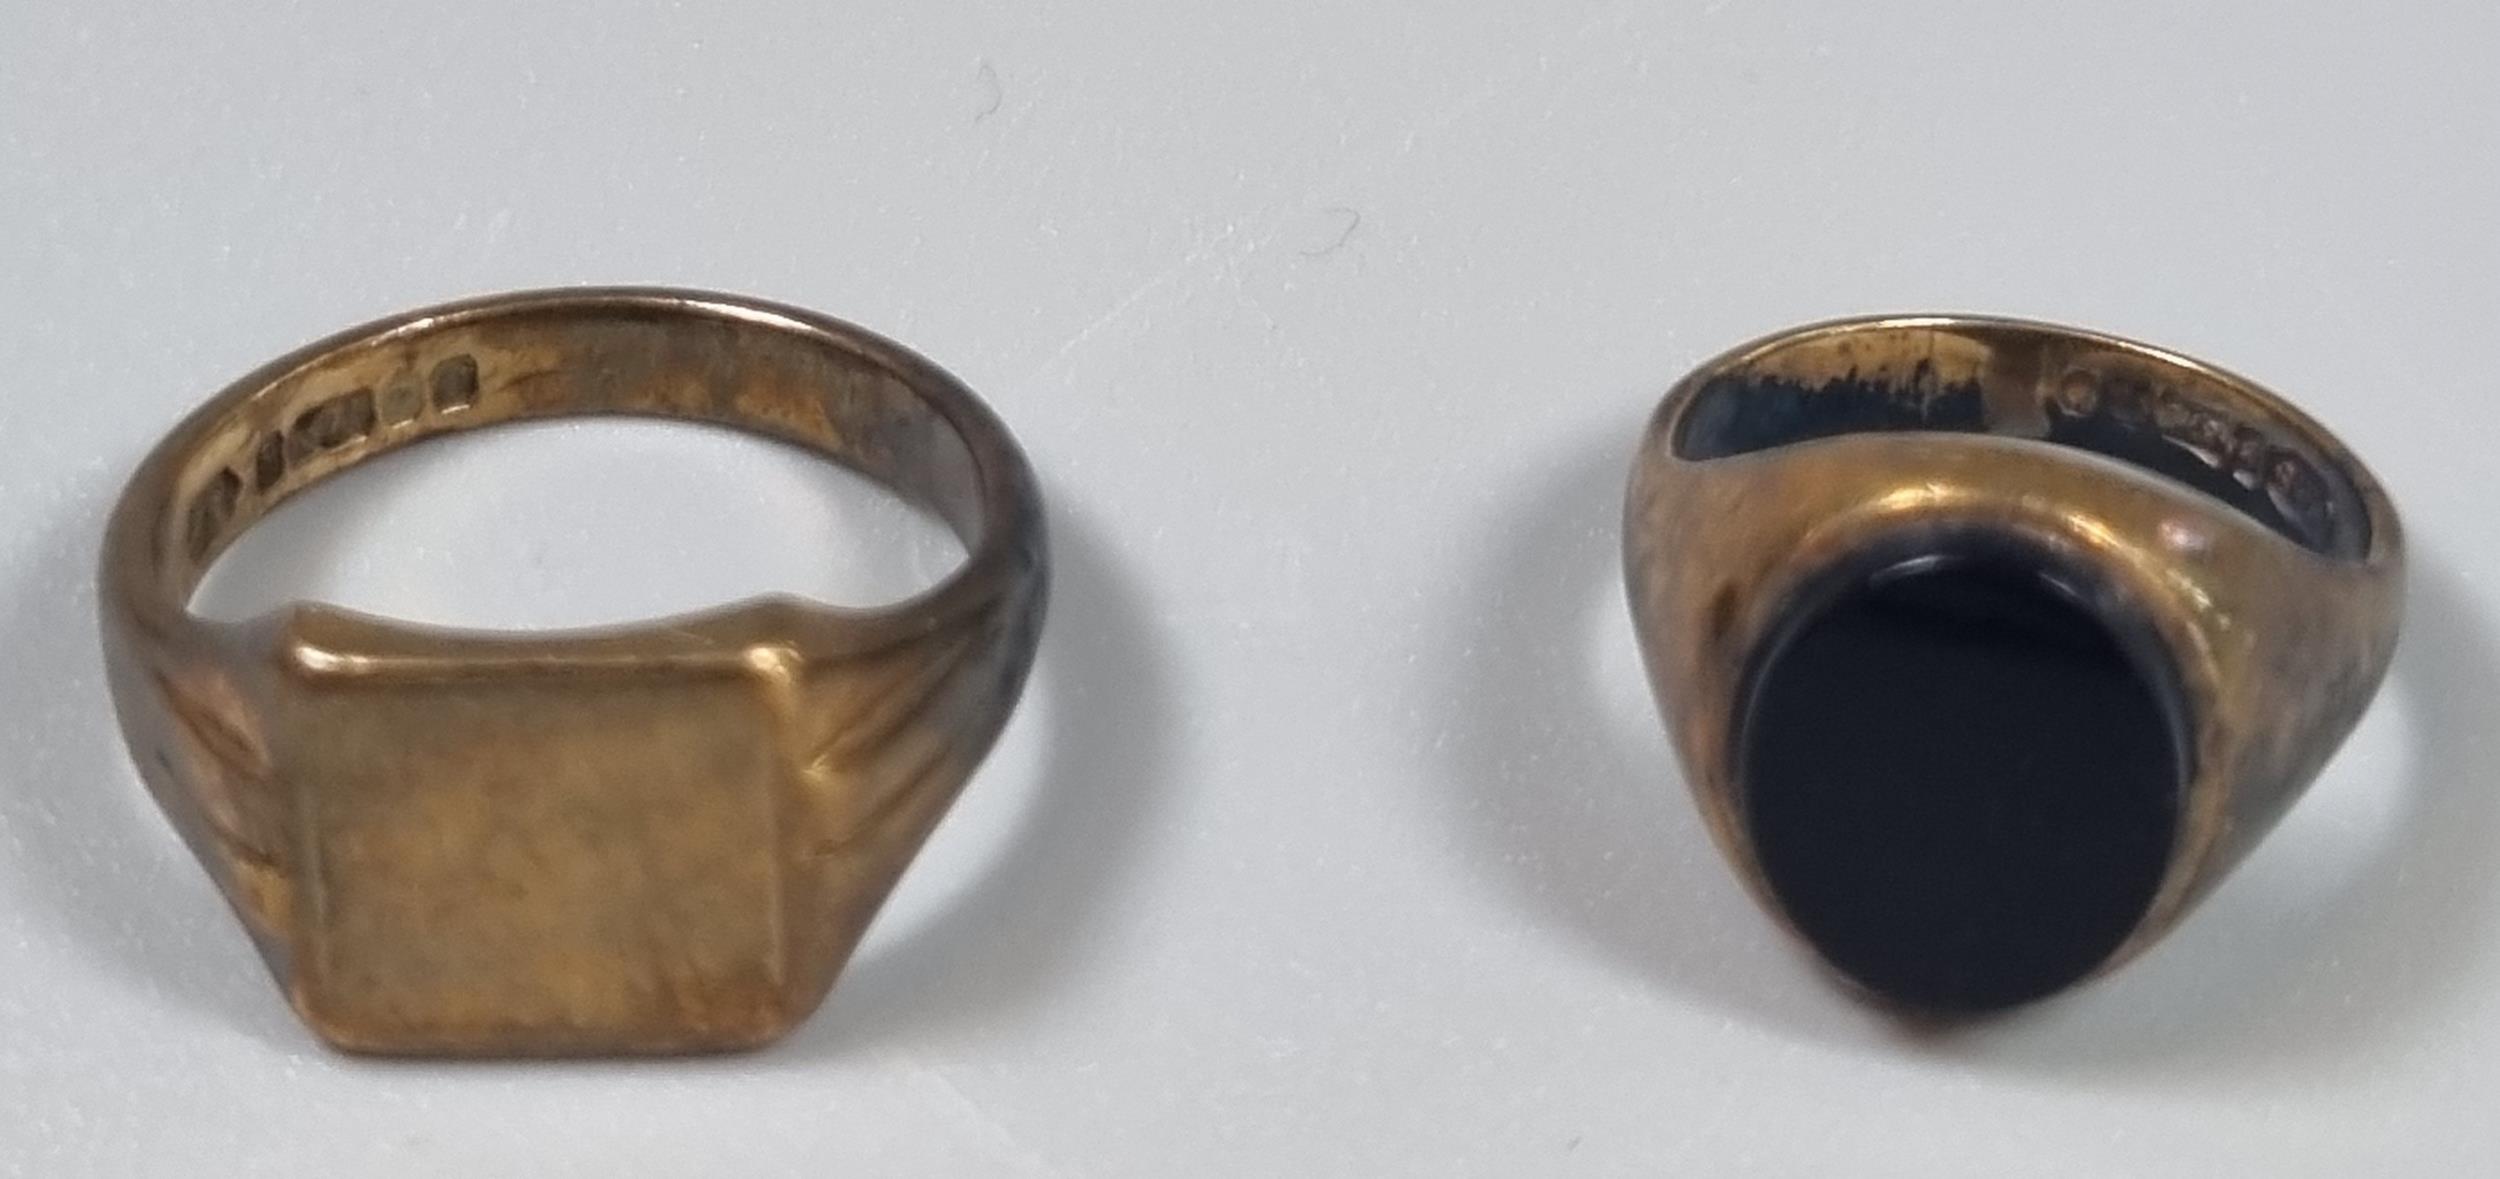 9ct gold signet ring. 6.6g approx. Size R. Together with a 9ct gold black hardstone signet ring. 4.